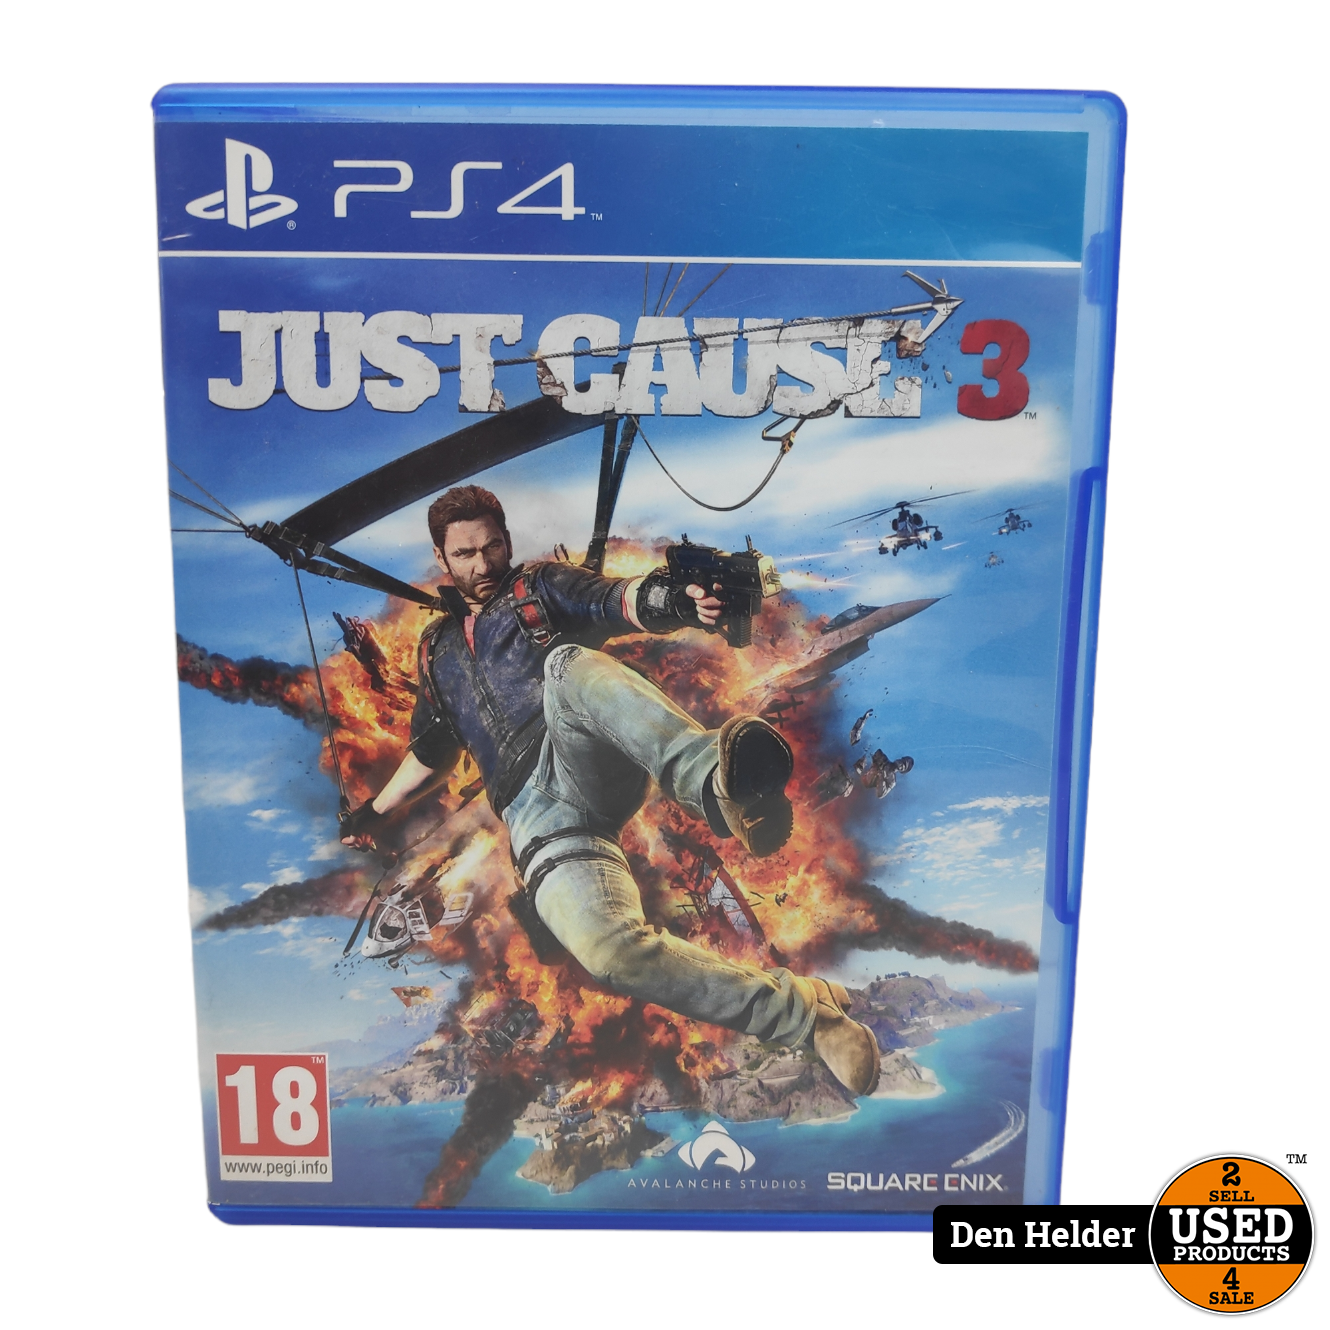 zuurgraad Presentator Buitenland Just Cause 3 PS4 Game - In Nette Staat - Used Products Den Helder